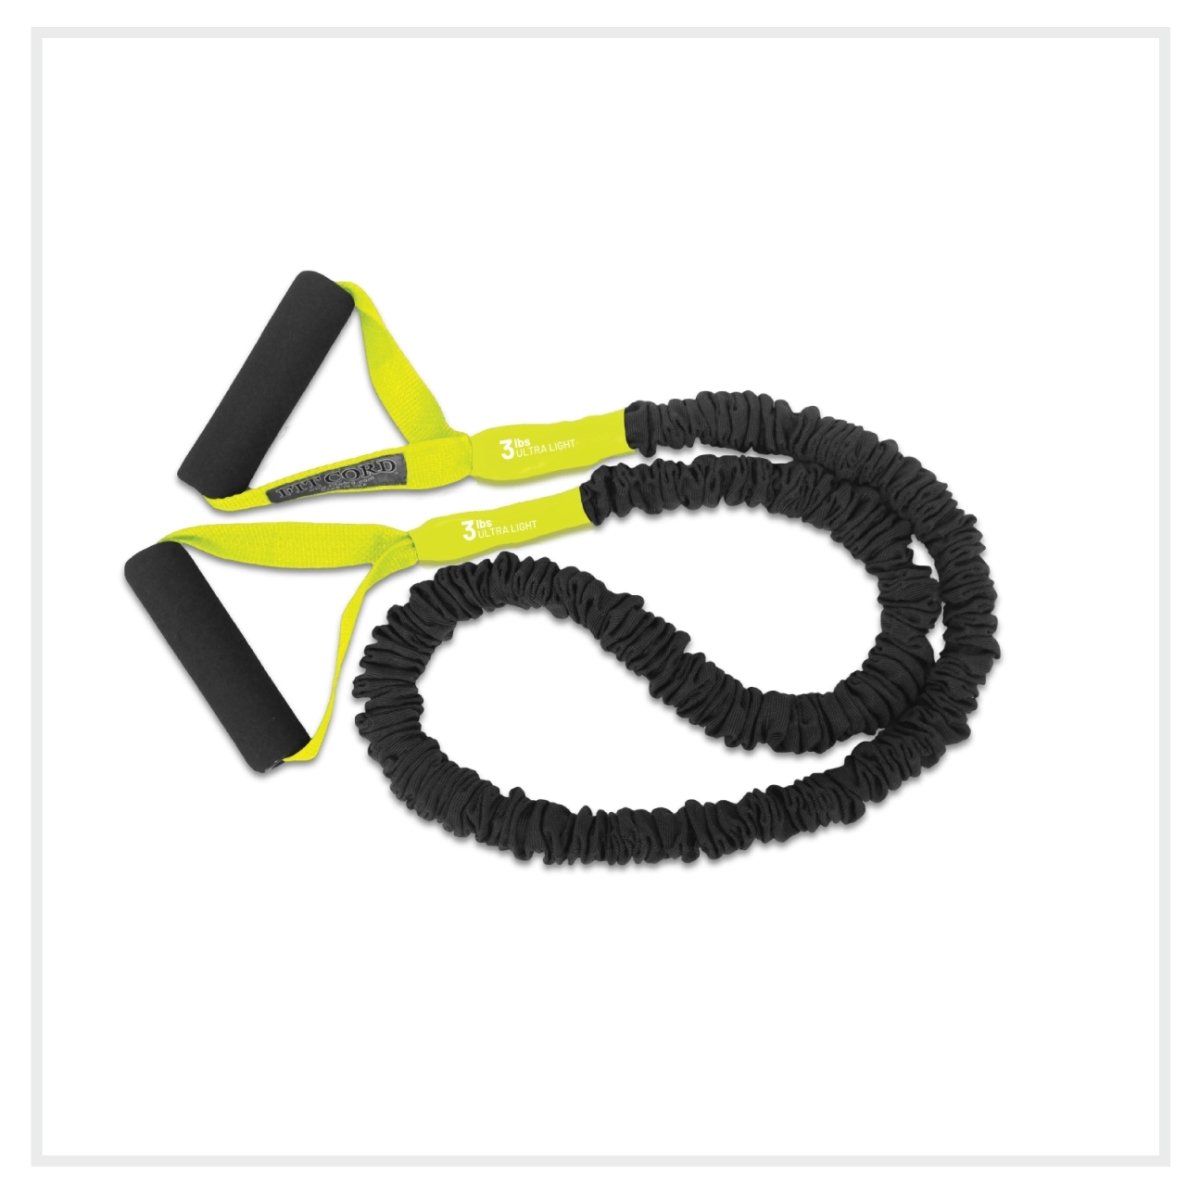 LONG FitCord Resistance Band- 6ft Ultra Light (3lb)